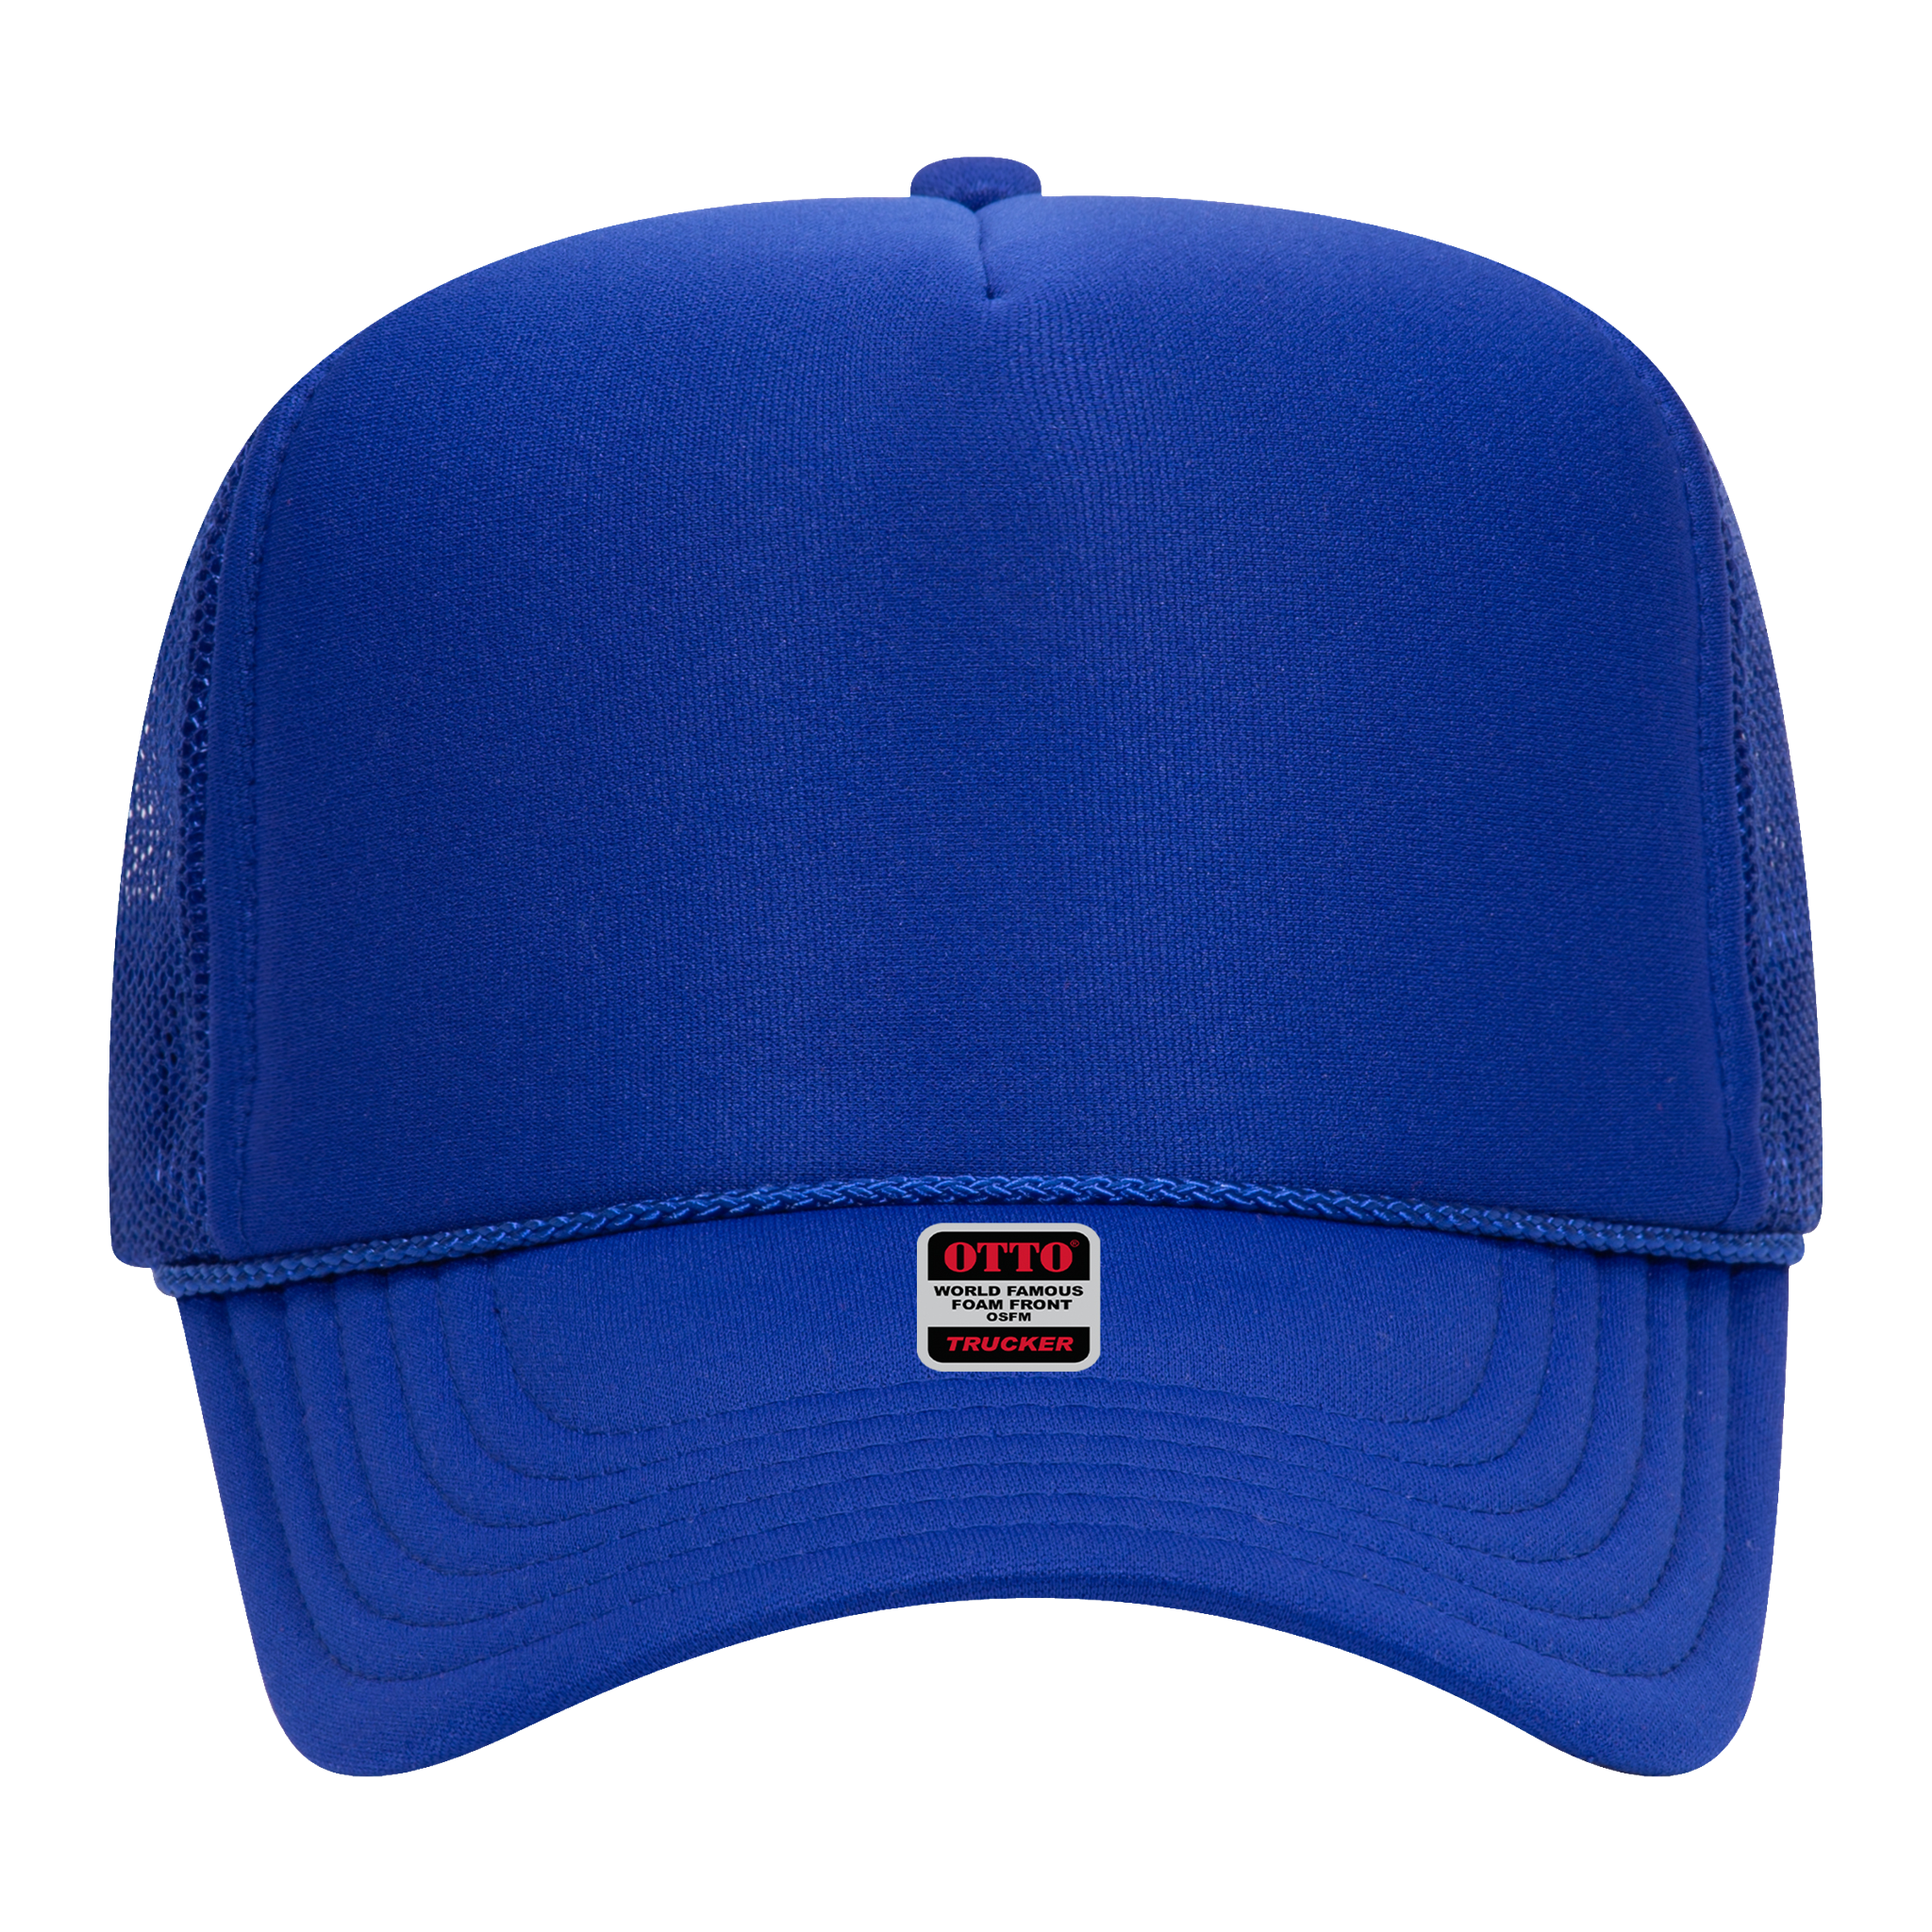 Panel High Hat Crown Five Back Front Mesh Design Own Your Apparel Trucker Foam OTTO Polyester